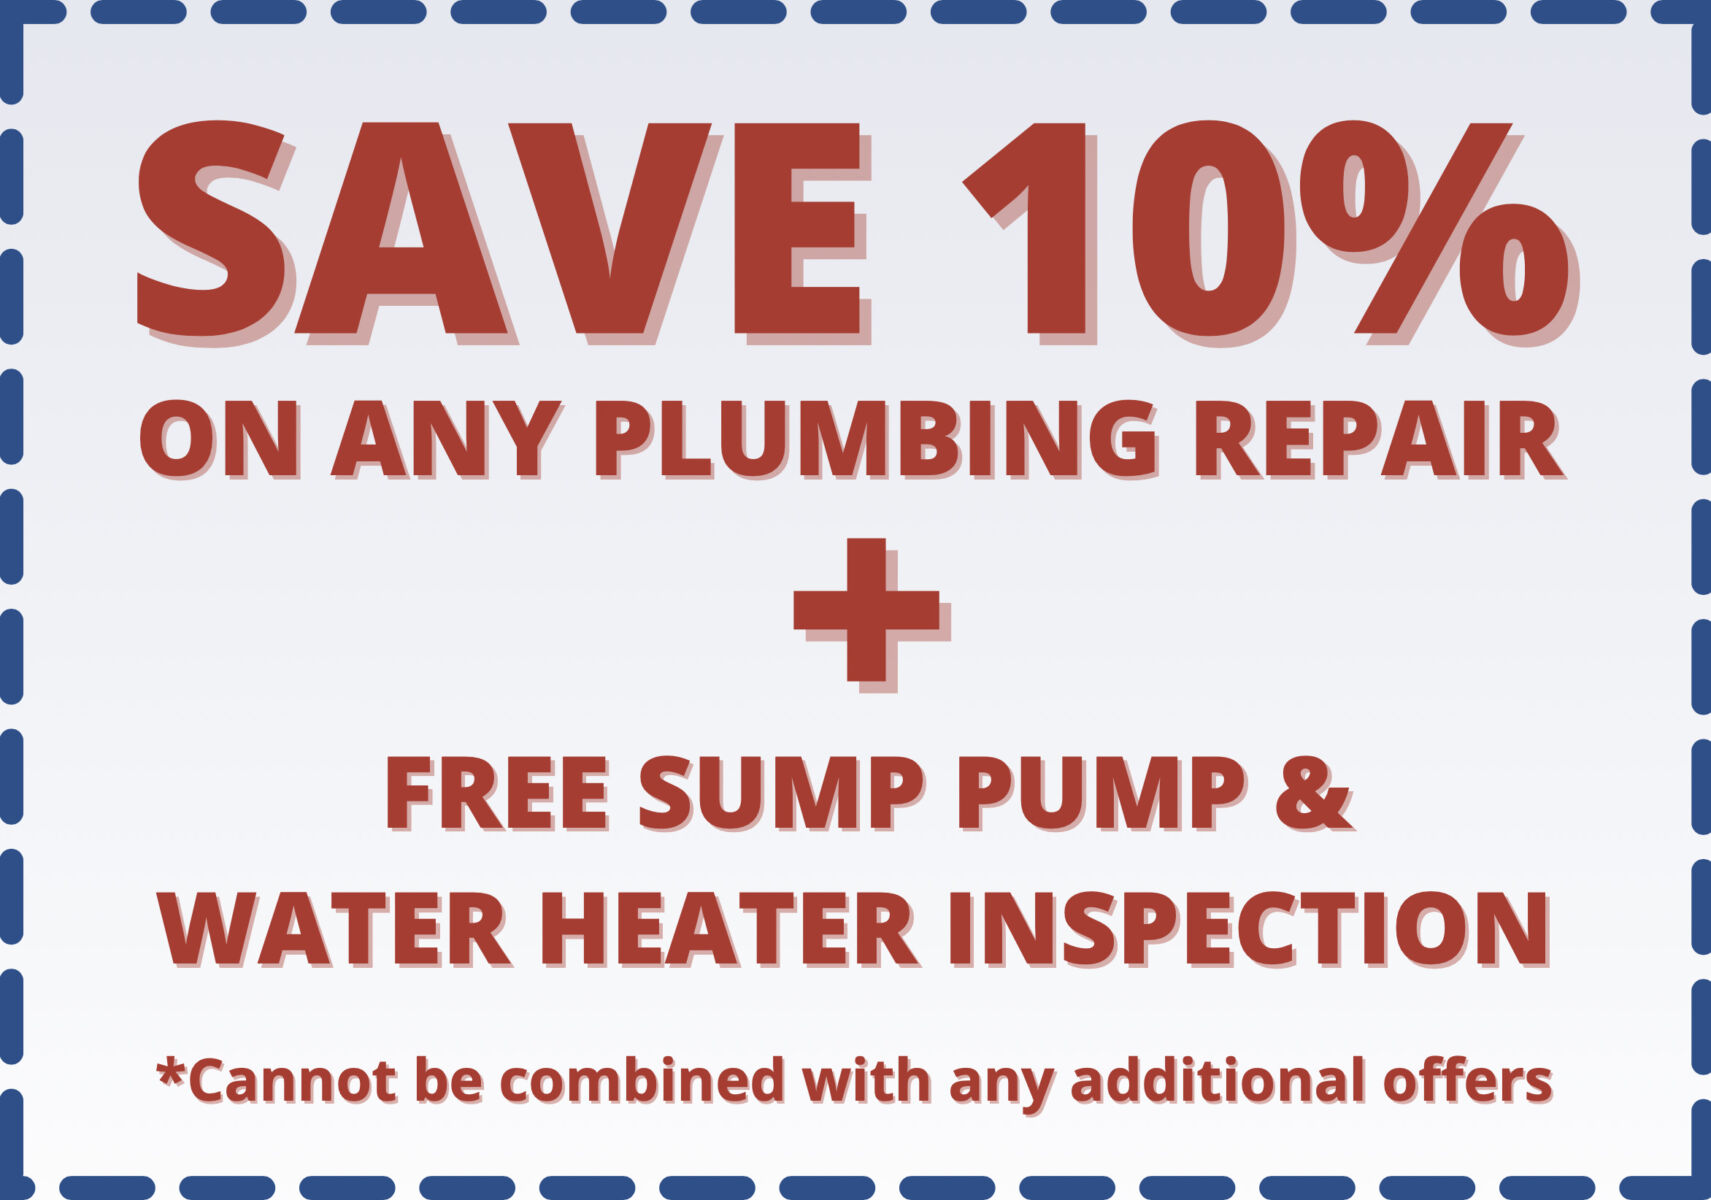 10% Off Plumbing Repairs + FREE Water Heater and Sump Pump Inspection